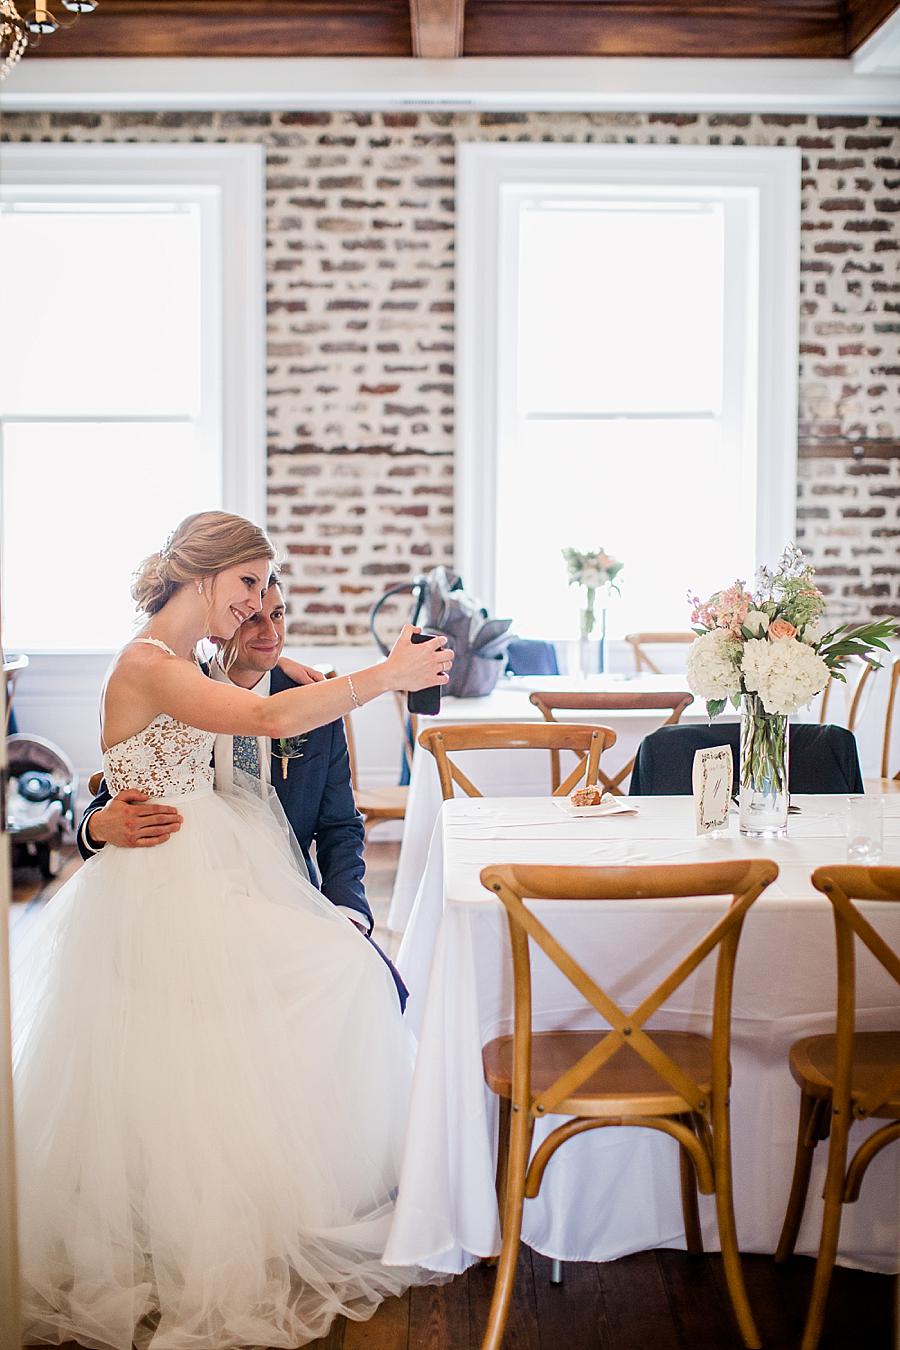 Taking a selfie at this Upstairs at Midtown Wedding by Knoxville Wedding Photographer, Amanda May Photos.